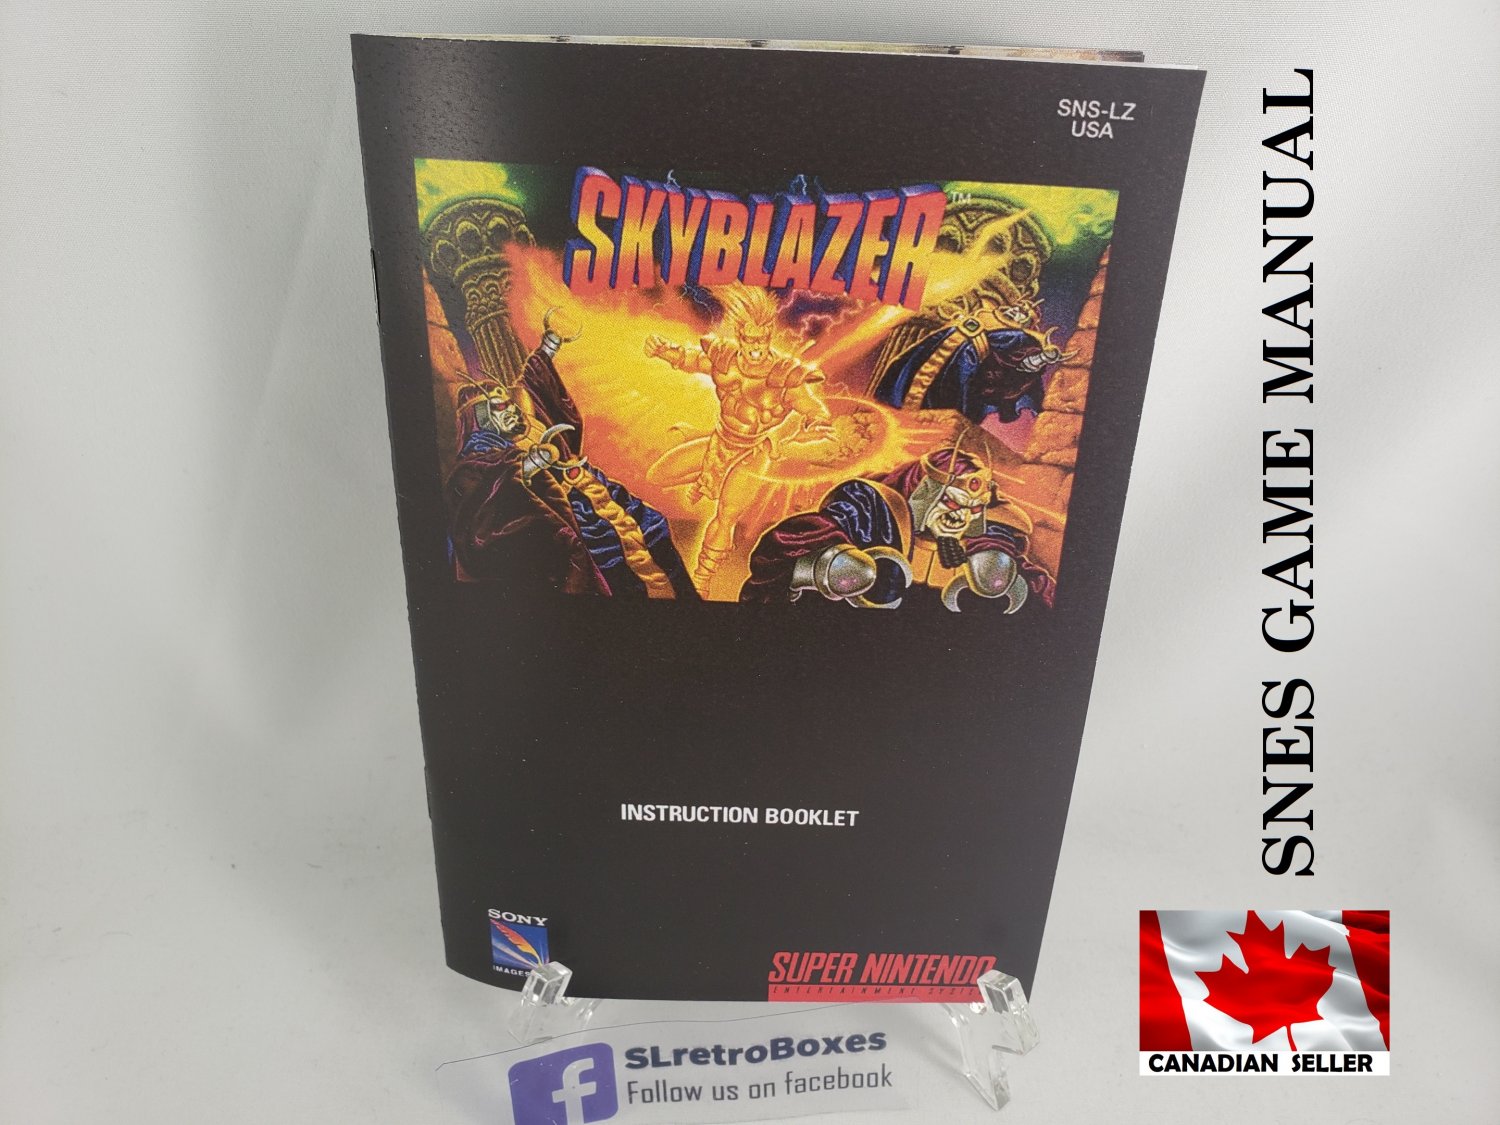 MANUAL SNES - SKYBLAZER - Super Nintendo Replacement Instruction Booklet